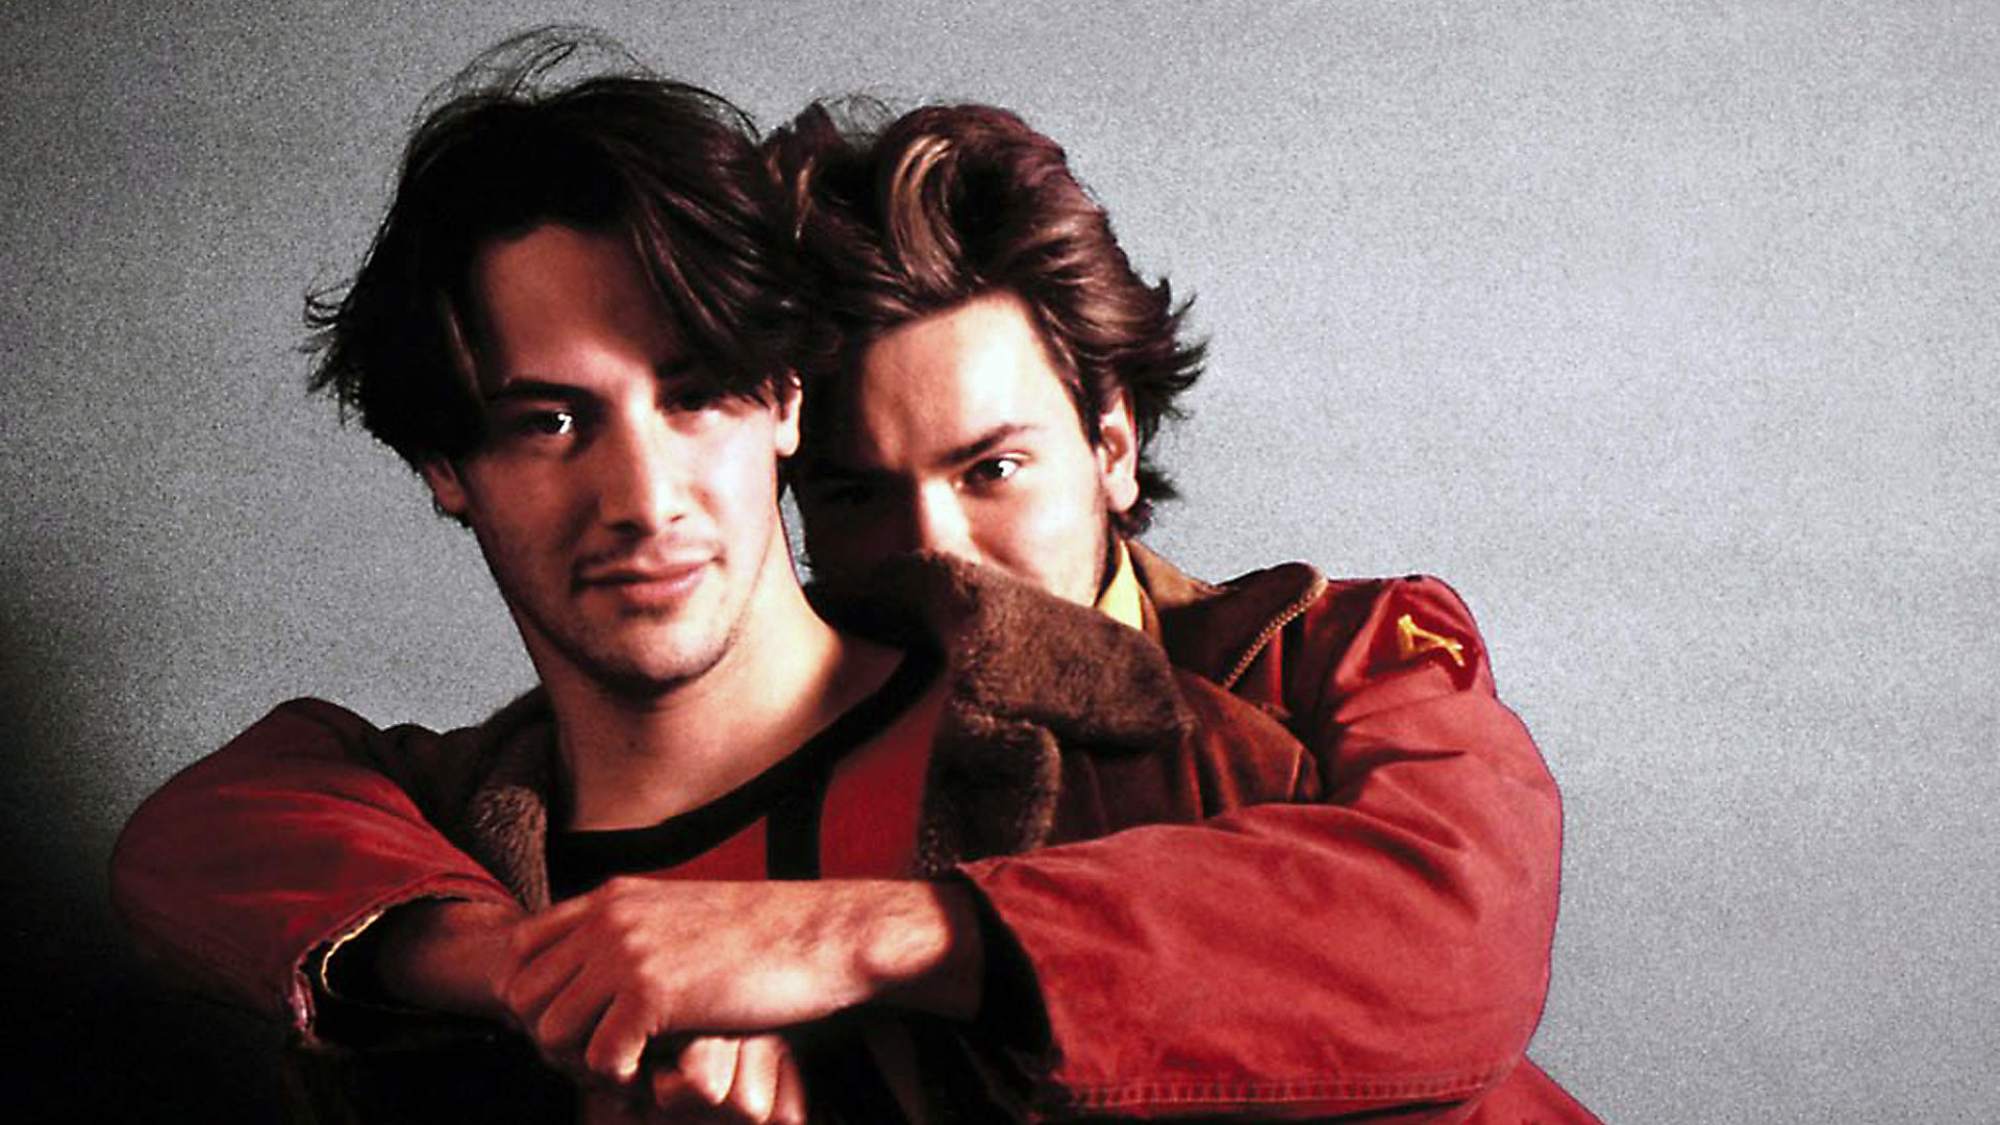 'My Private Idaho' Keanu Reeves as Scott Favor and River Phoenix as Mike Waters. Mike has his arms wrapped around Scott from behind.